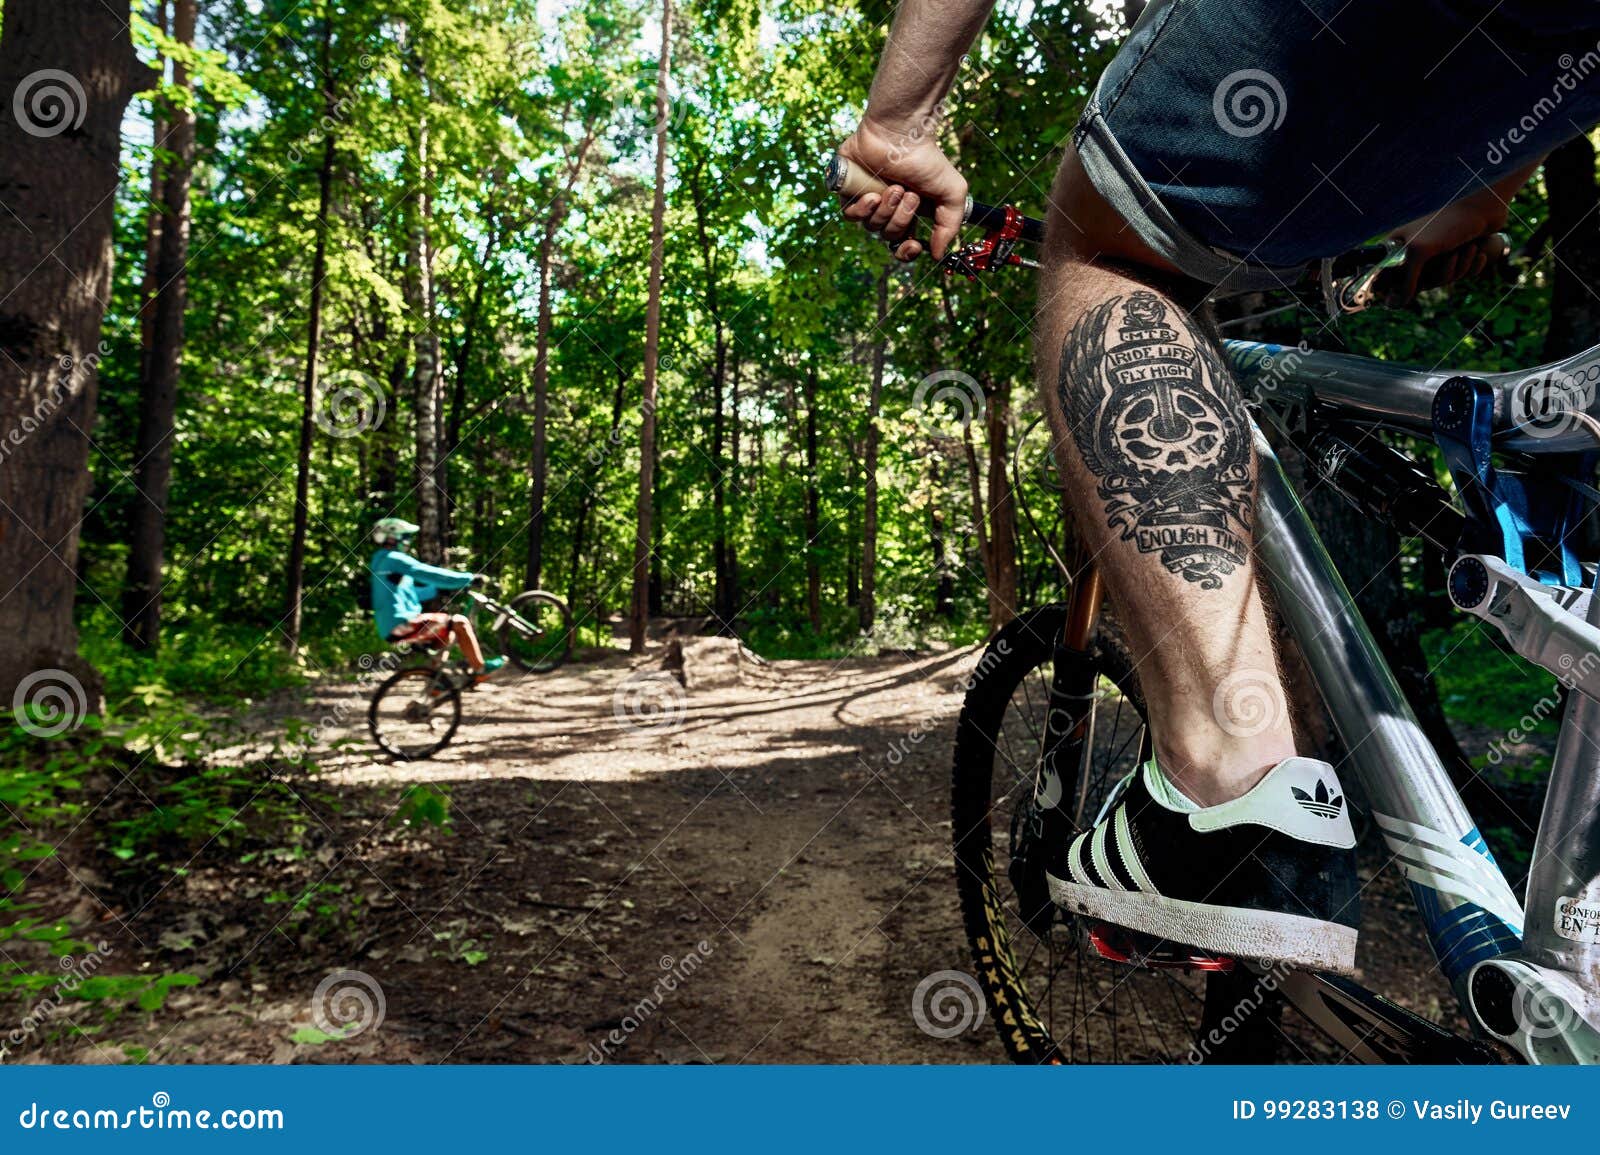 101 Best MTB Tattoo Ideas That Will Blow Your Mind  Outsons